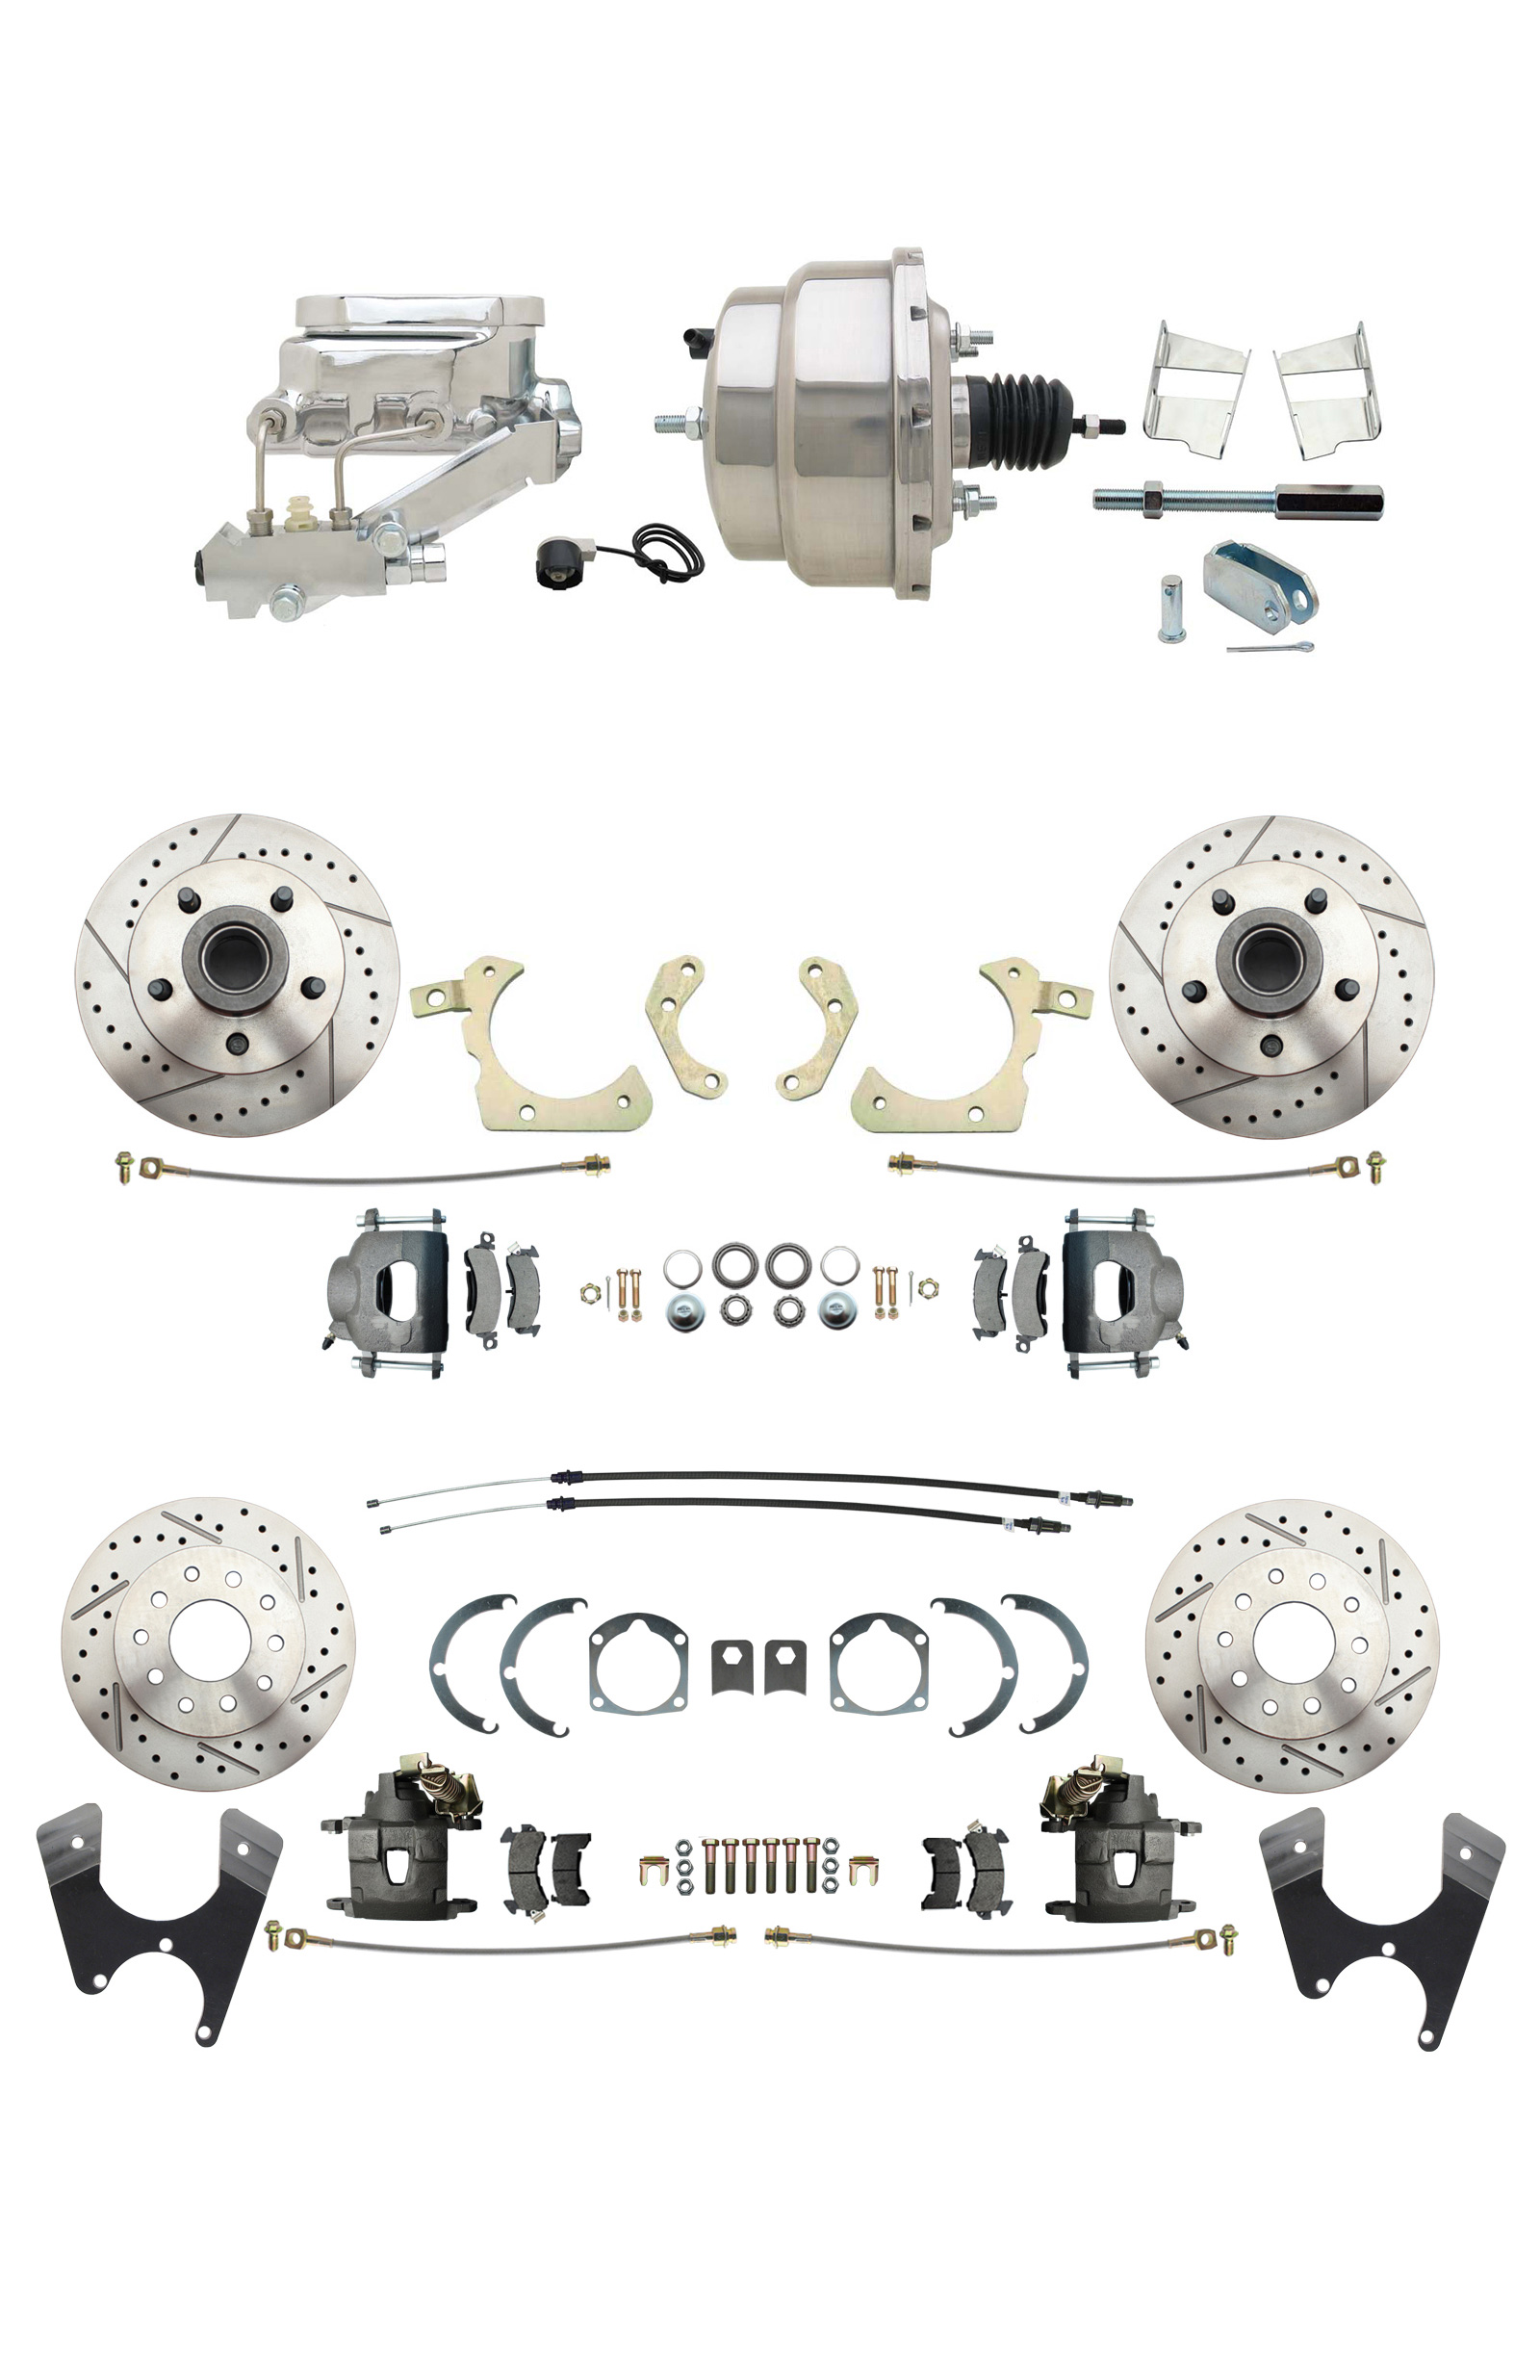 1959-1964 GM Full Size Disc Brake Kit Drilled/Slotted Rotors (Impala, Bel Air, Biscayne) & 8 Dual Stainless Steel Booster Conversion Kit W/ Chrome Flat Top Master Cylinder Left Mount Disc/ Drum Proportioning Valve Kit